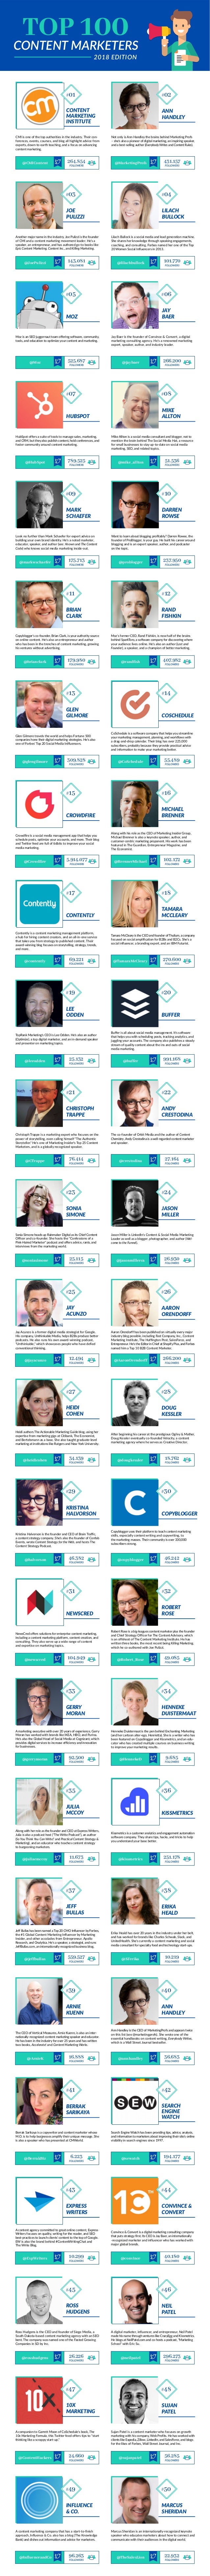 The Top 100 Content Marketers (2018 Report)